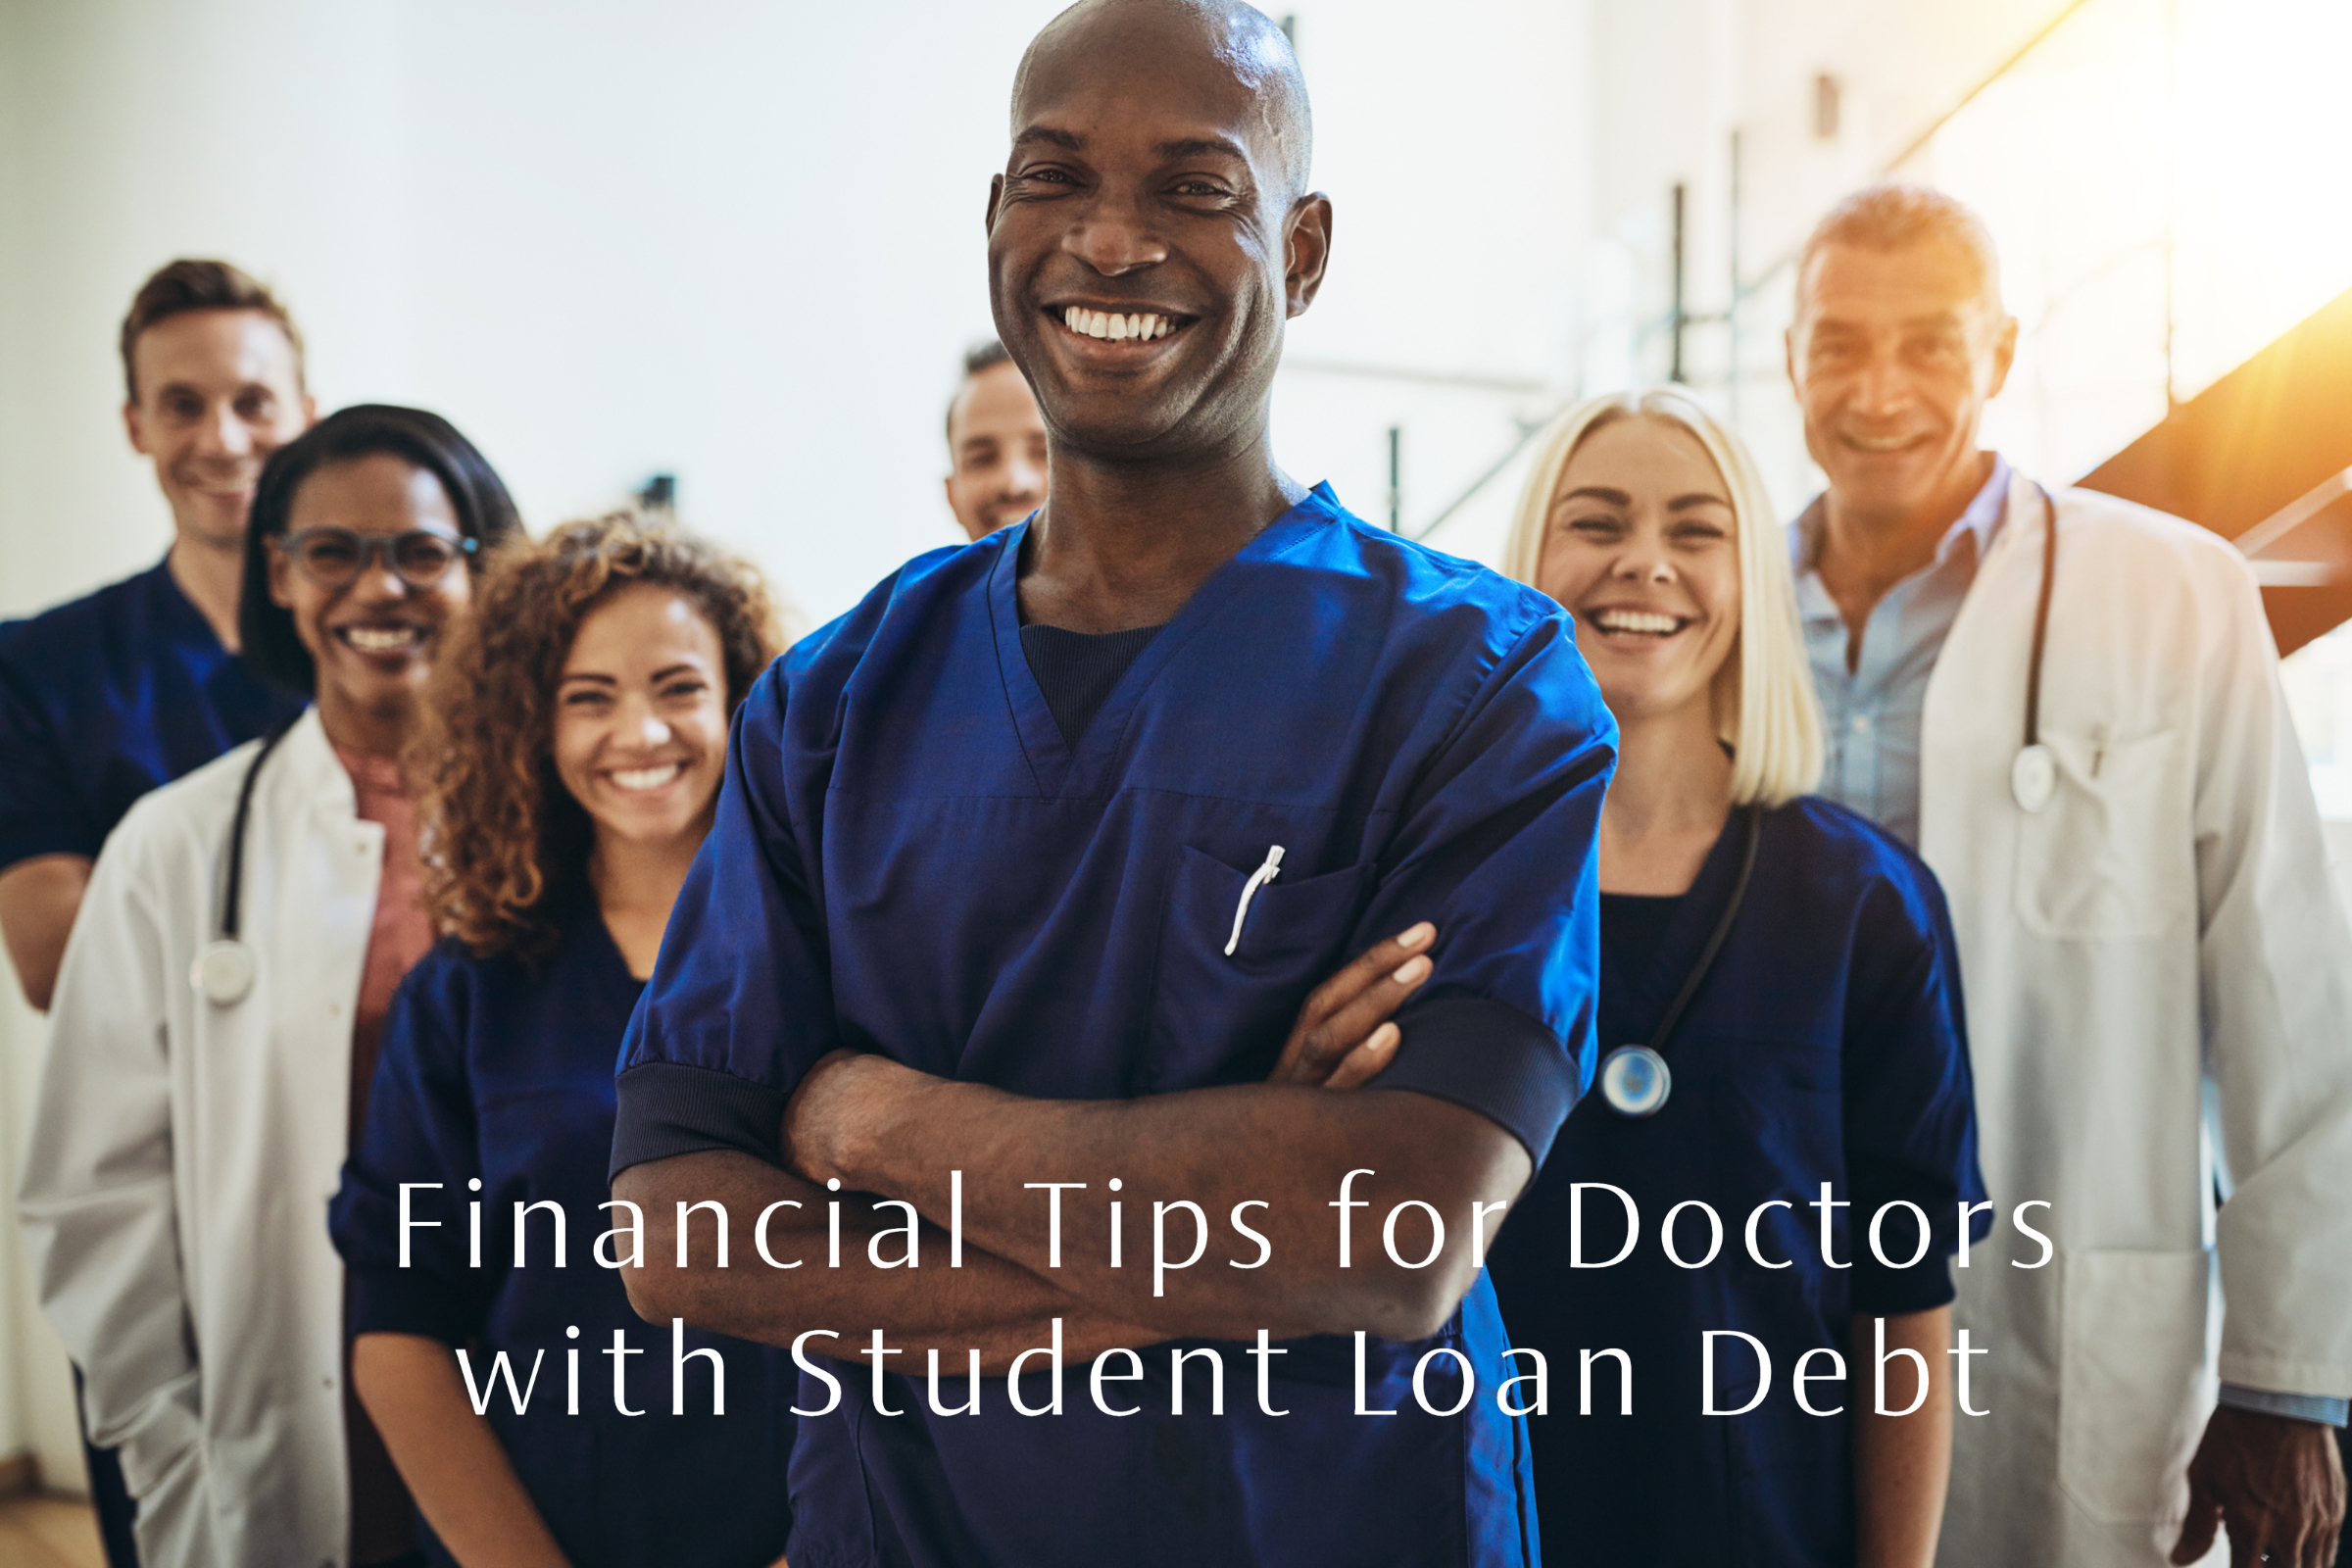 02-2023-EG-A3-FI-O2-Financial-Tips-for-Doctors-with-Student-Loan-Debt-1